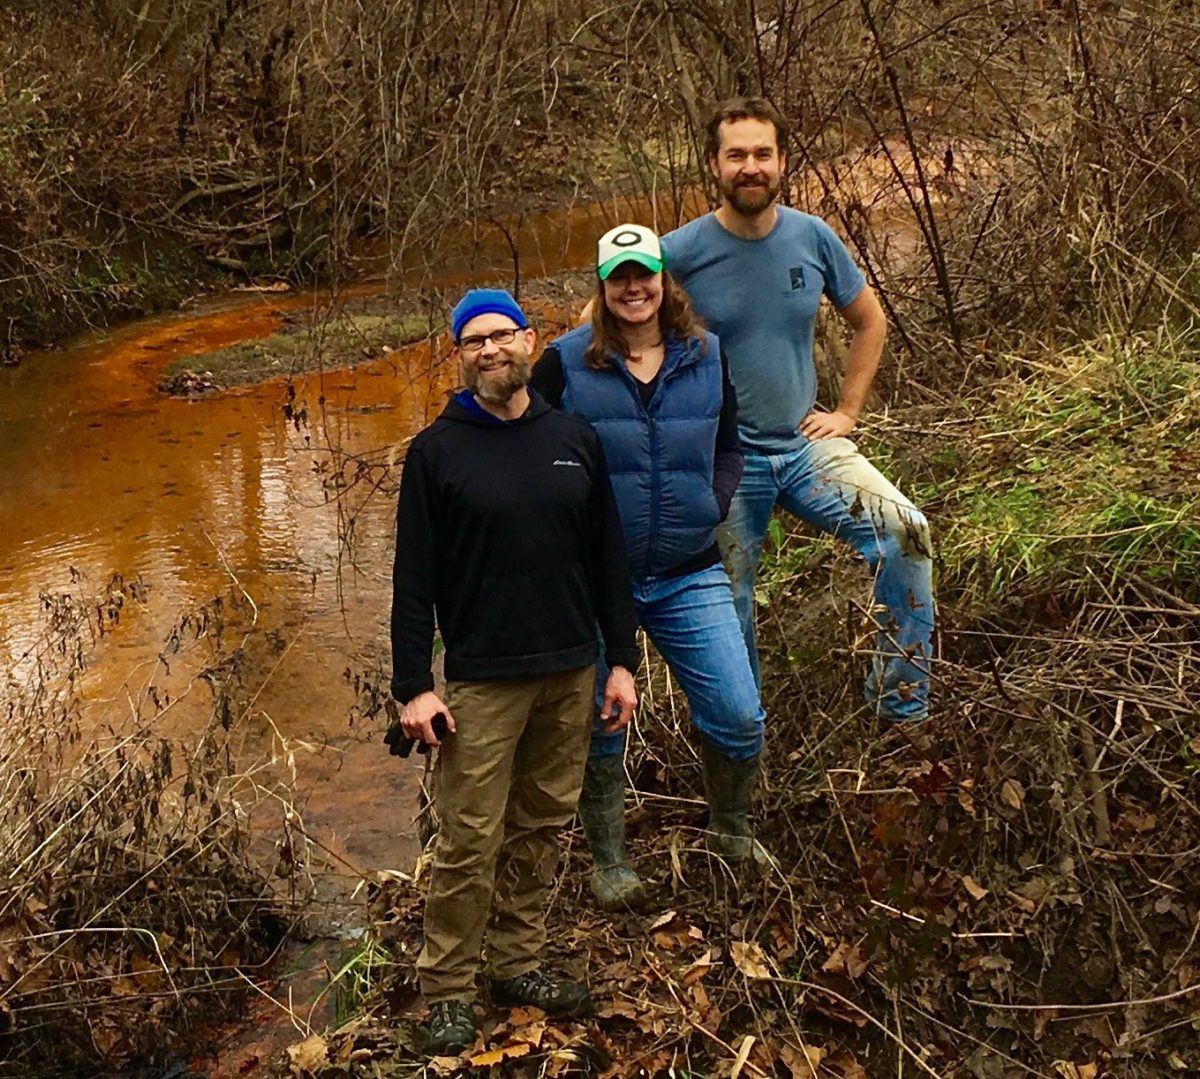 The 3-person reclaimed team standing in front of a rusty river